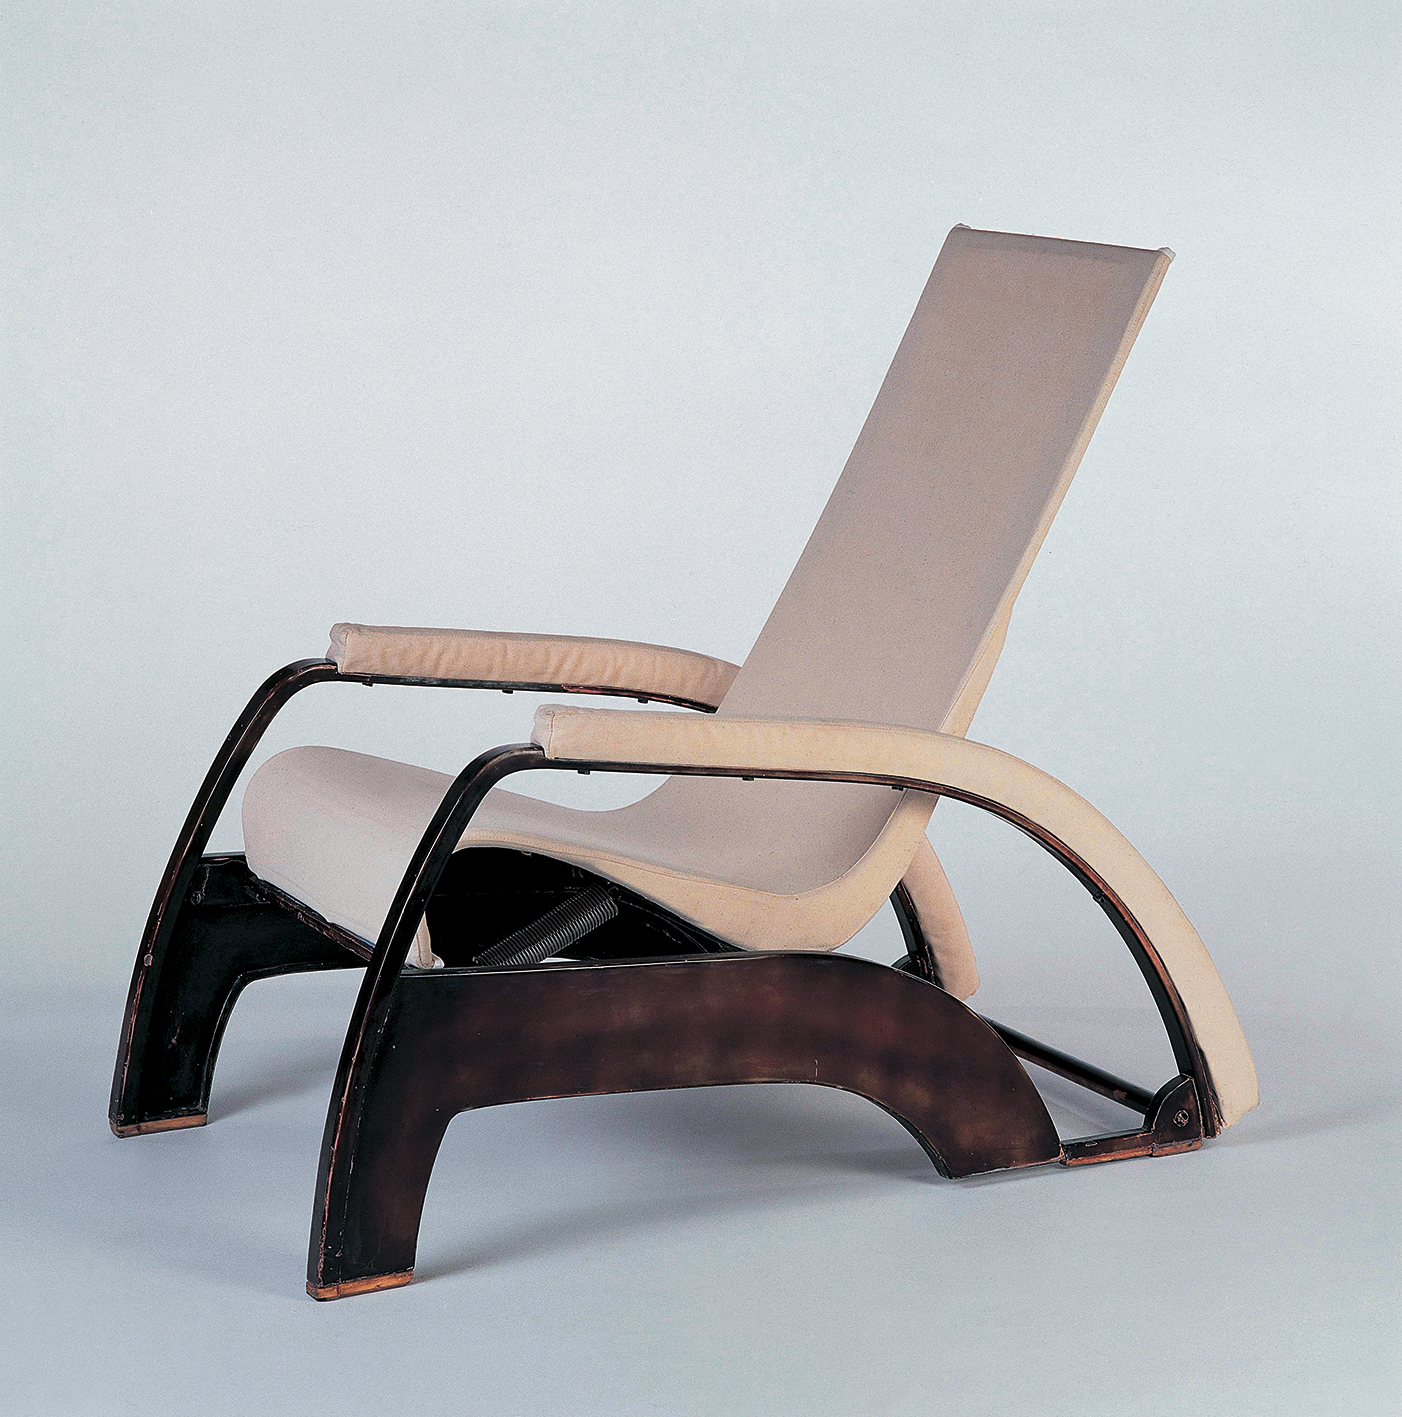 Grand Repos armchair, 1930. Sheet steel, steel threads and stretched canvas.